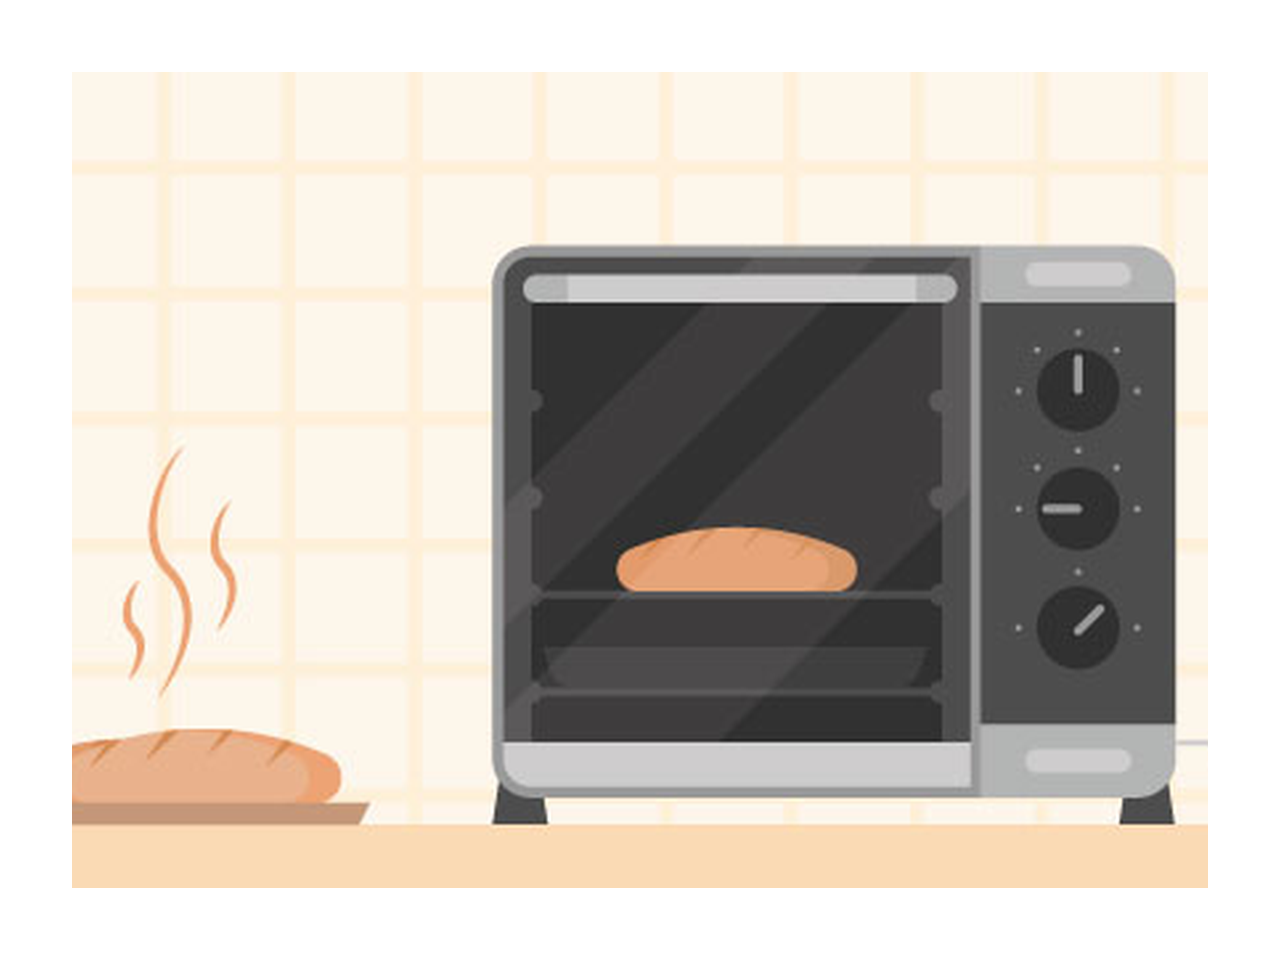 Oven clipart bread oven. How to make a